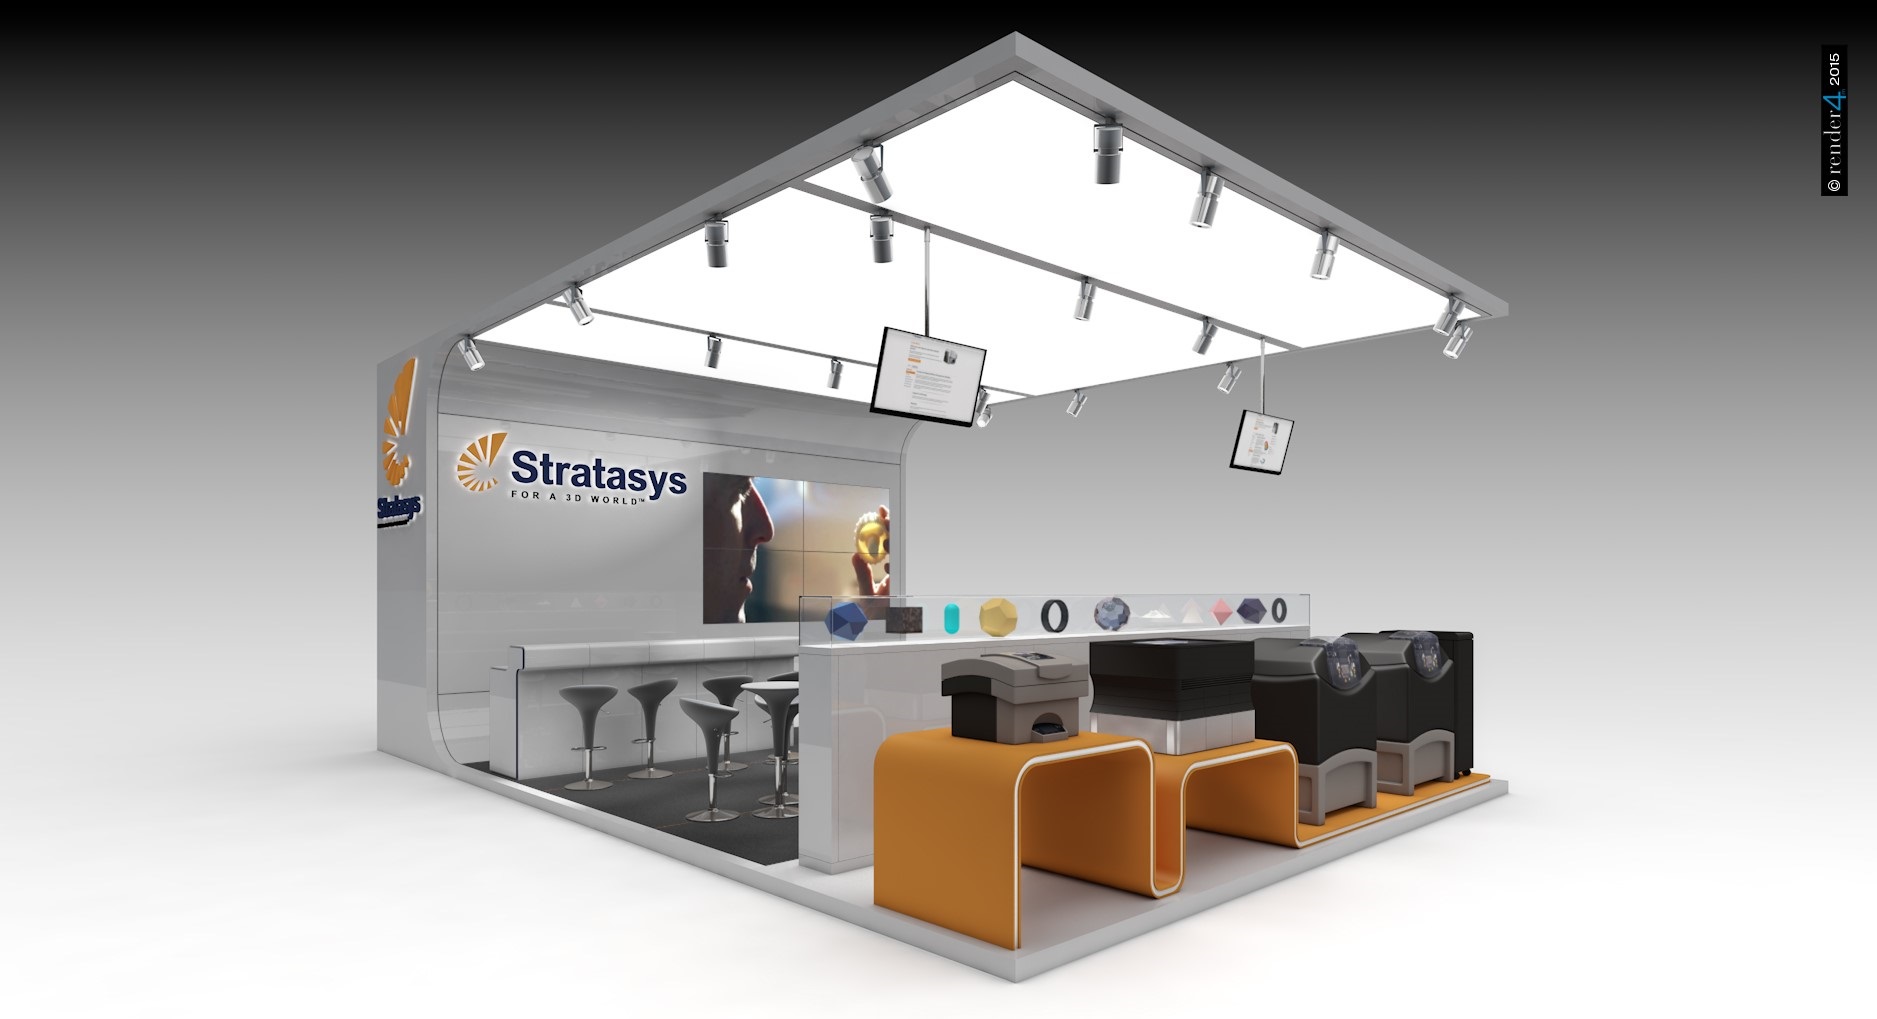 Exhibition booth - Designer booths - Design booth example 1